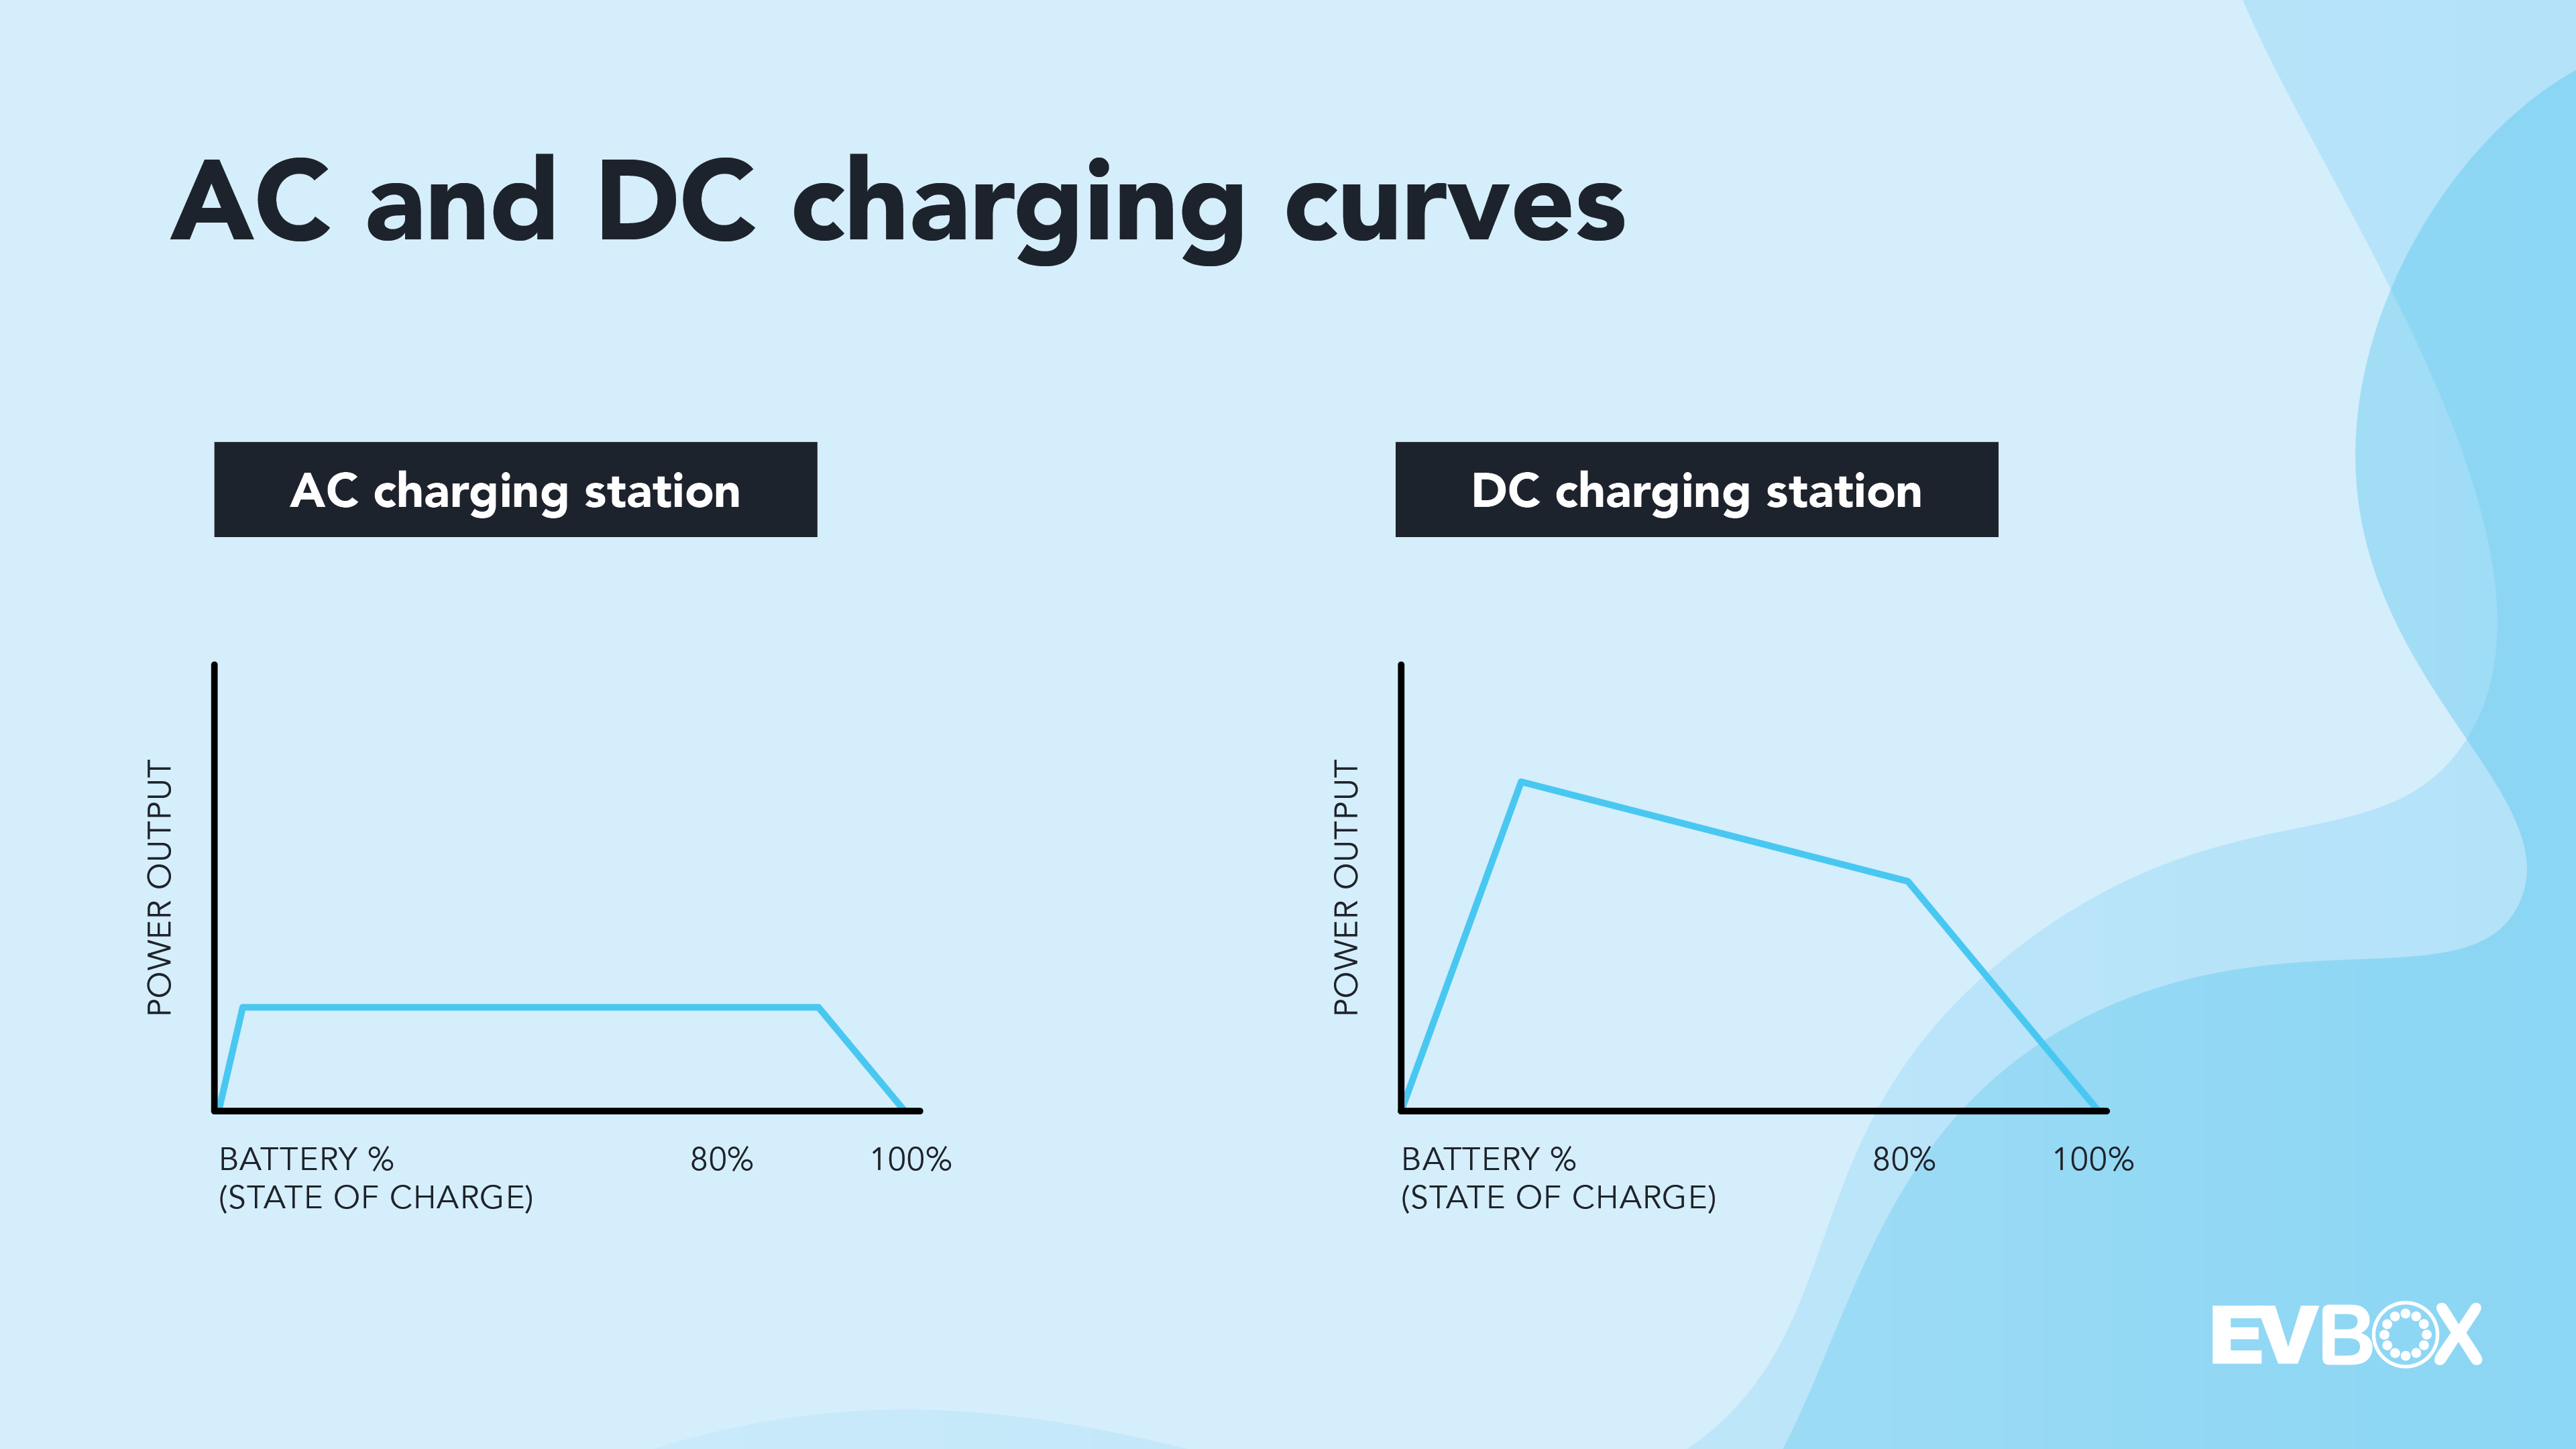 An infographic of AC and DC charging curves that shows the difference between AC and DC charging station's power output and an EV battery's state of charge.